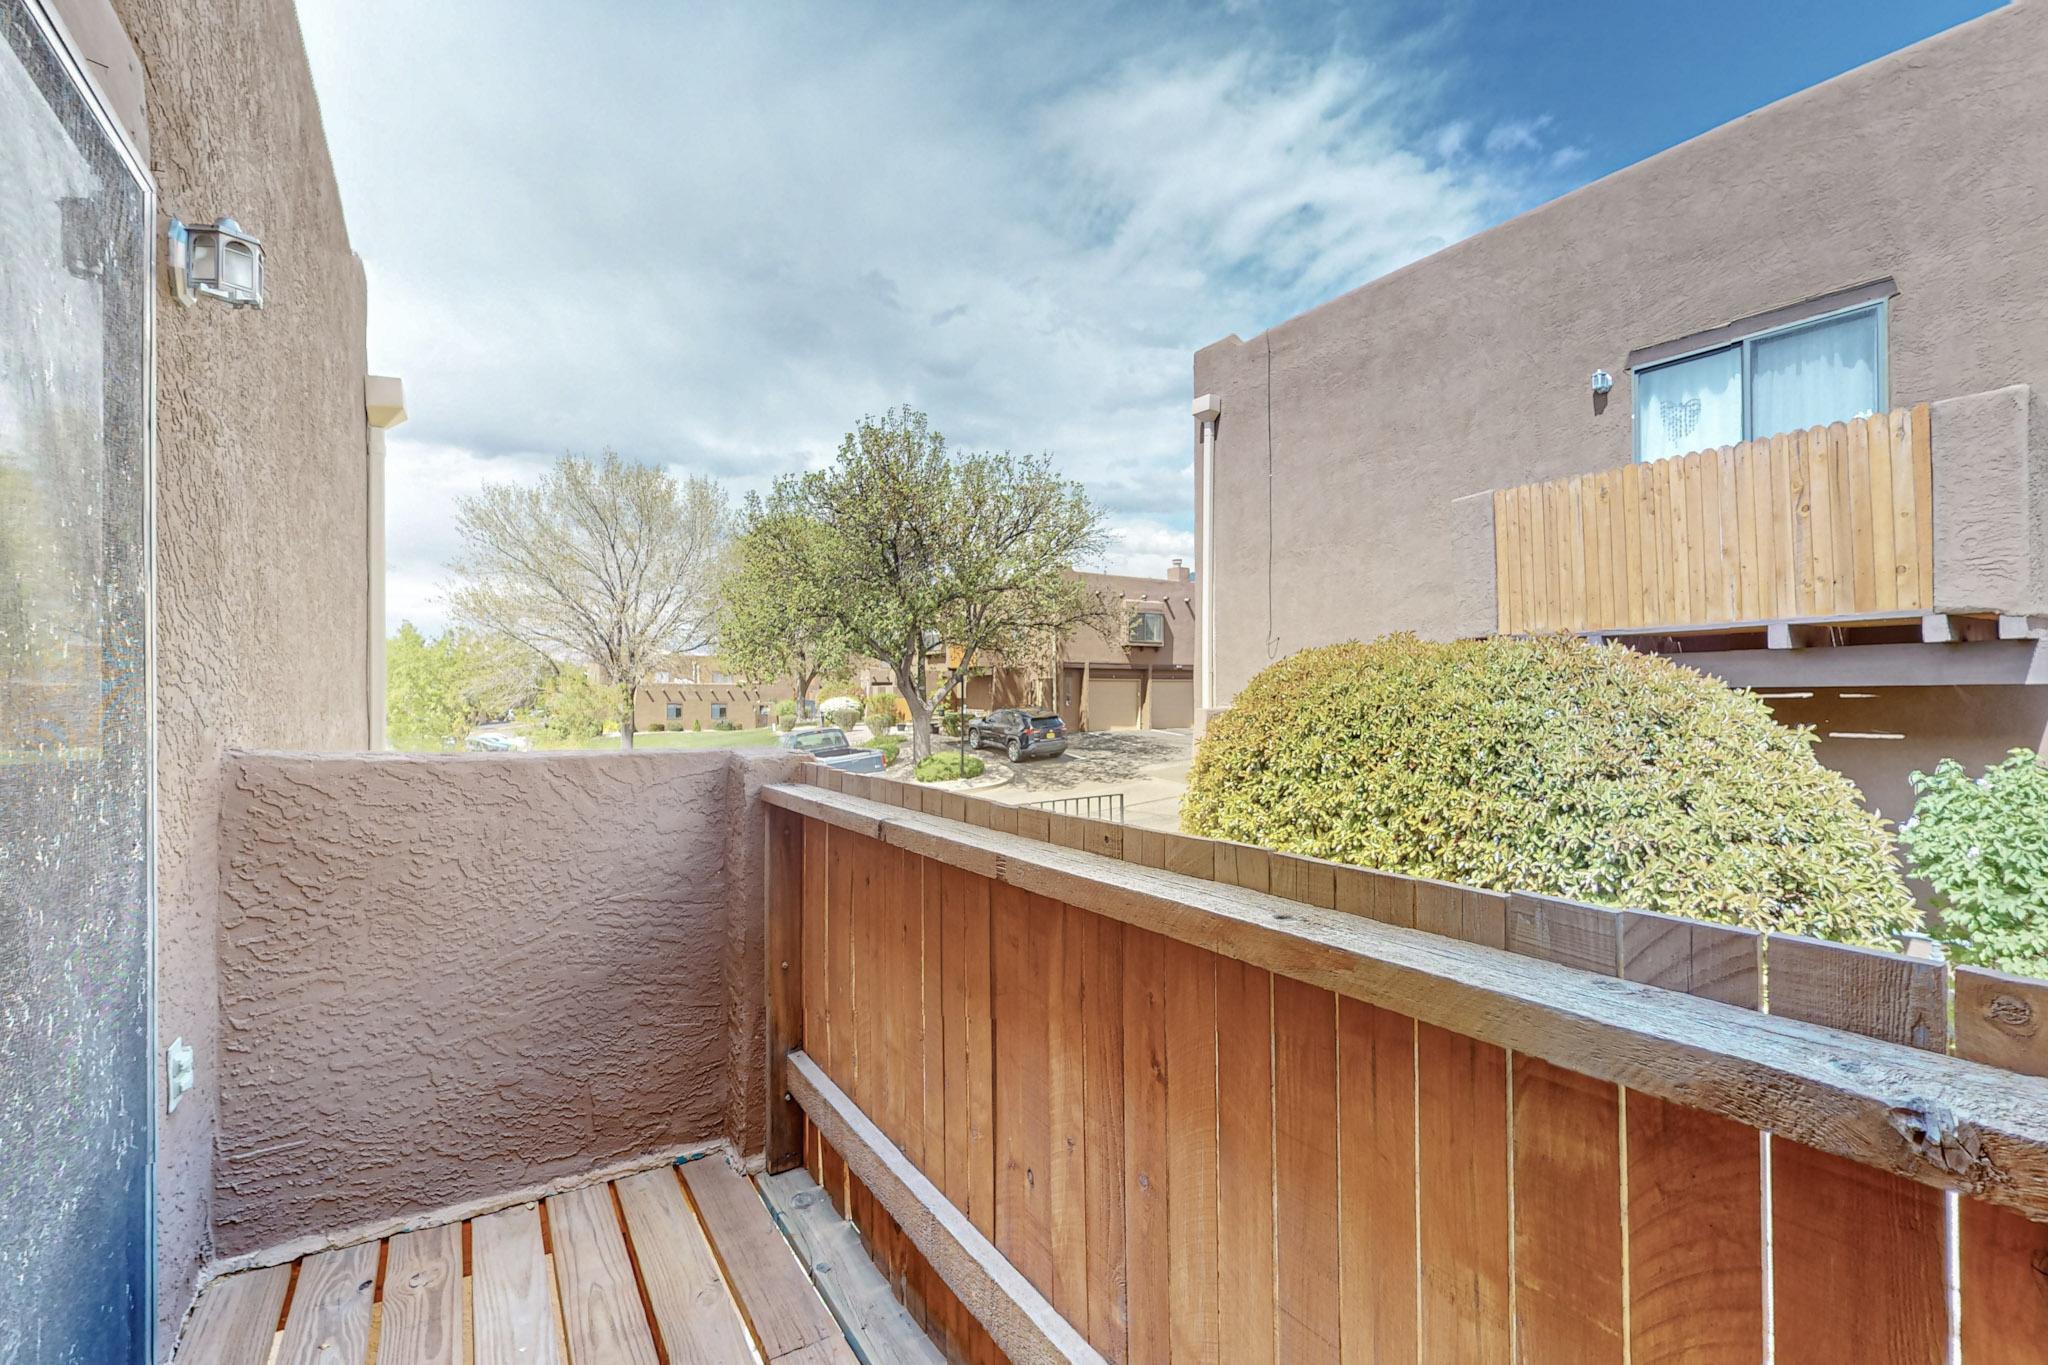 5801 Lowell Street NE 15d, Albuquerque, New Mexico 87111, 2 Bedrooms Bedrooms, ,2 BathroomsBathrooms,Residential,For Sale,5801 Lowell Street NE 15d,1061167